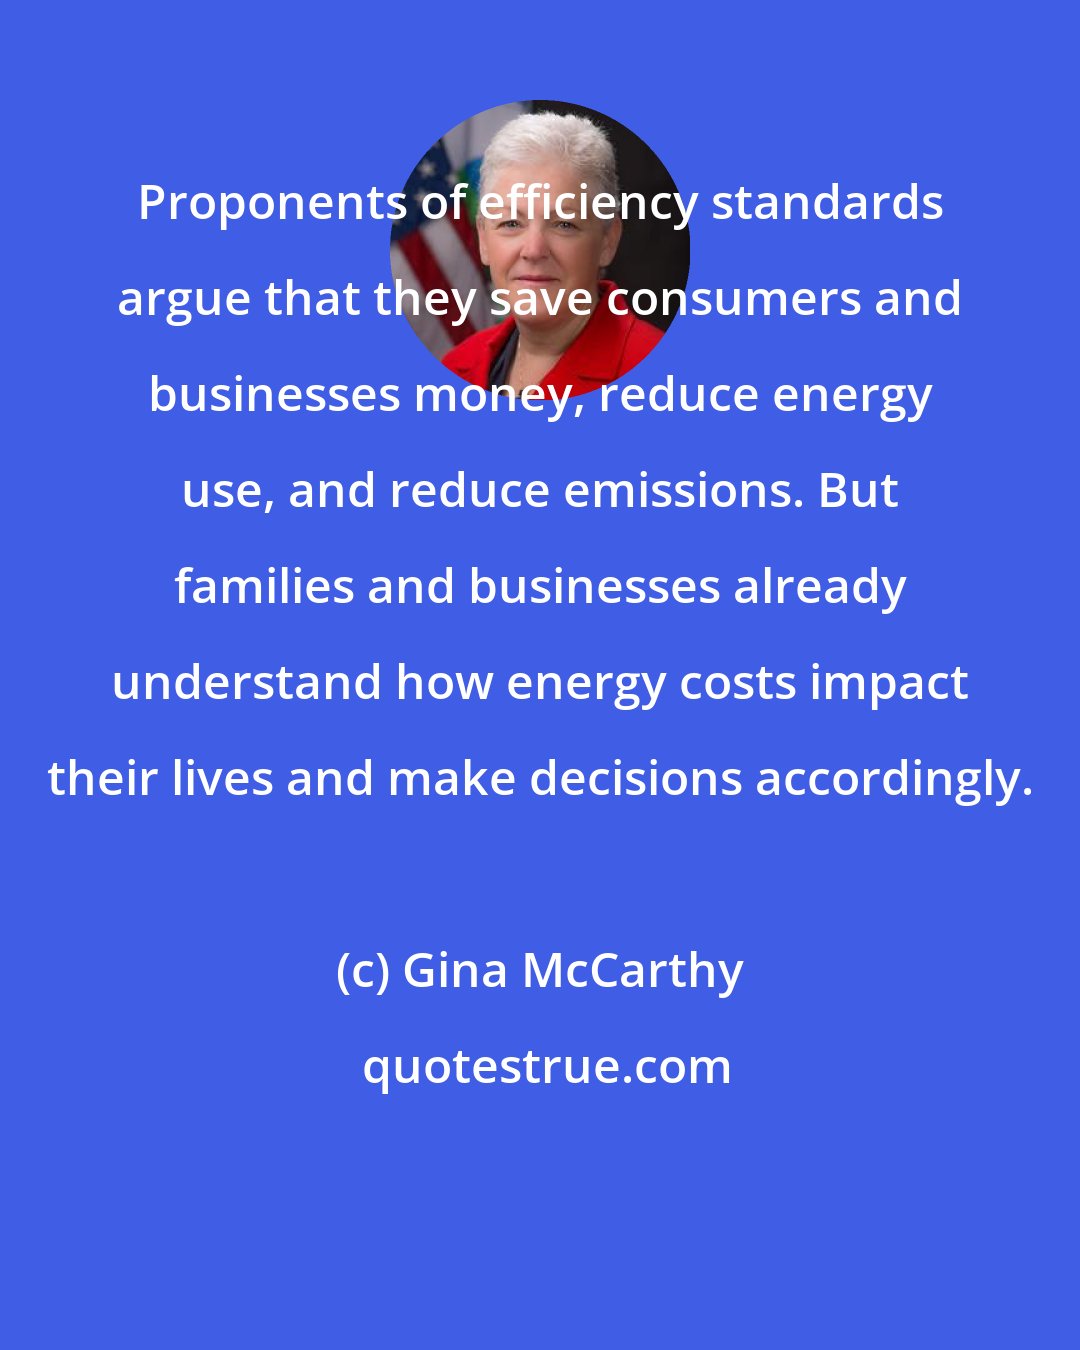 Gina McCarthy: Proponents of efficiency standards argue that they save consumers and businesses money, reduce energy use, and reduce emissions. But families and businesses already understand how energy costs impact their lives and make decisions accordingly.